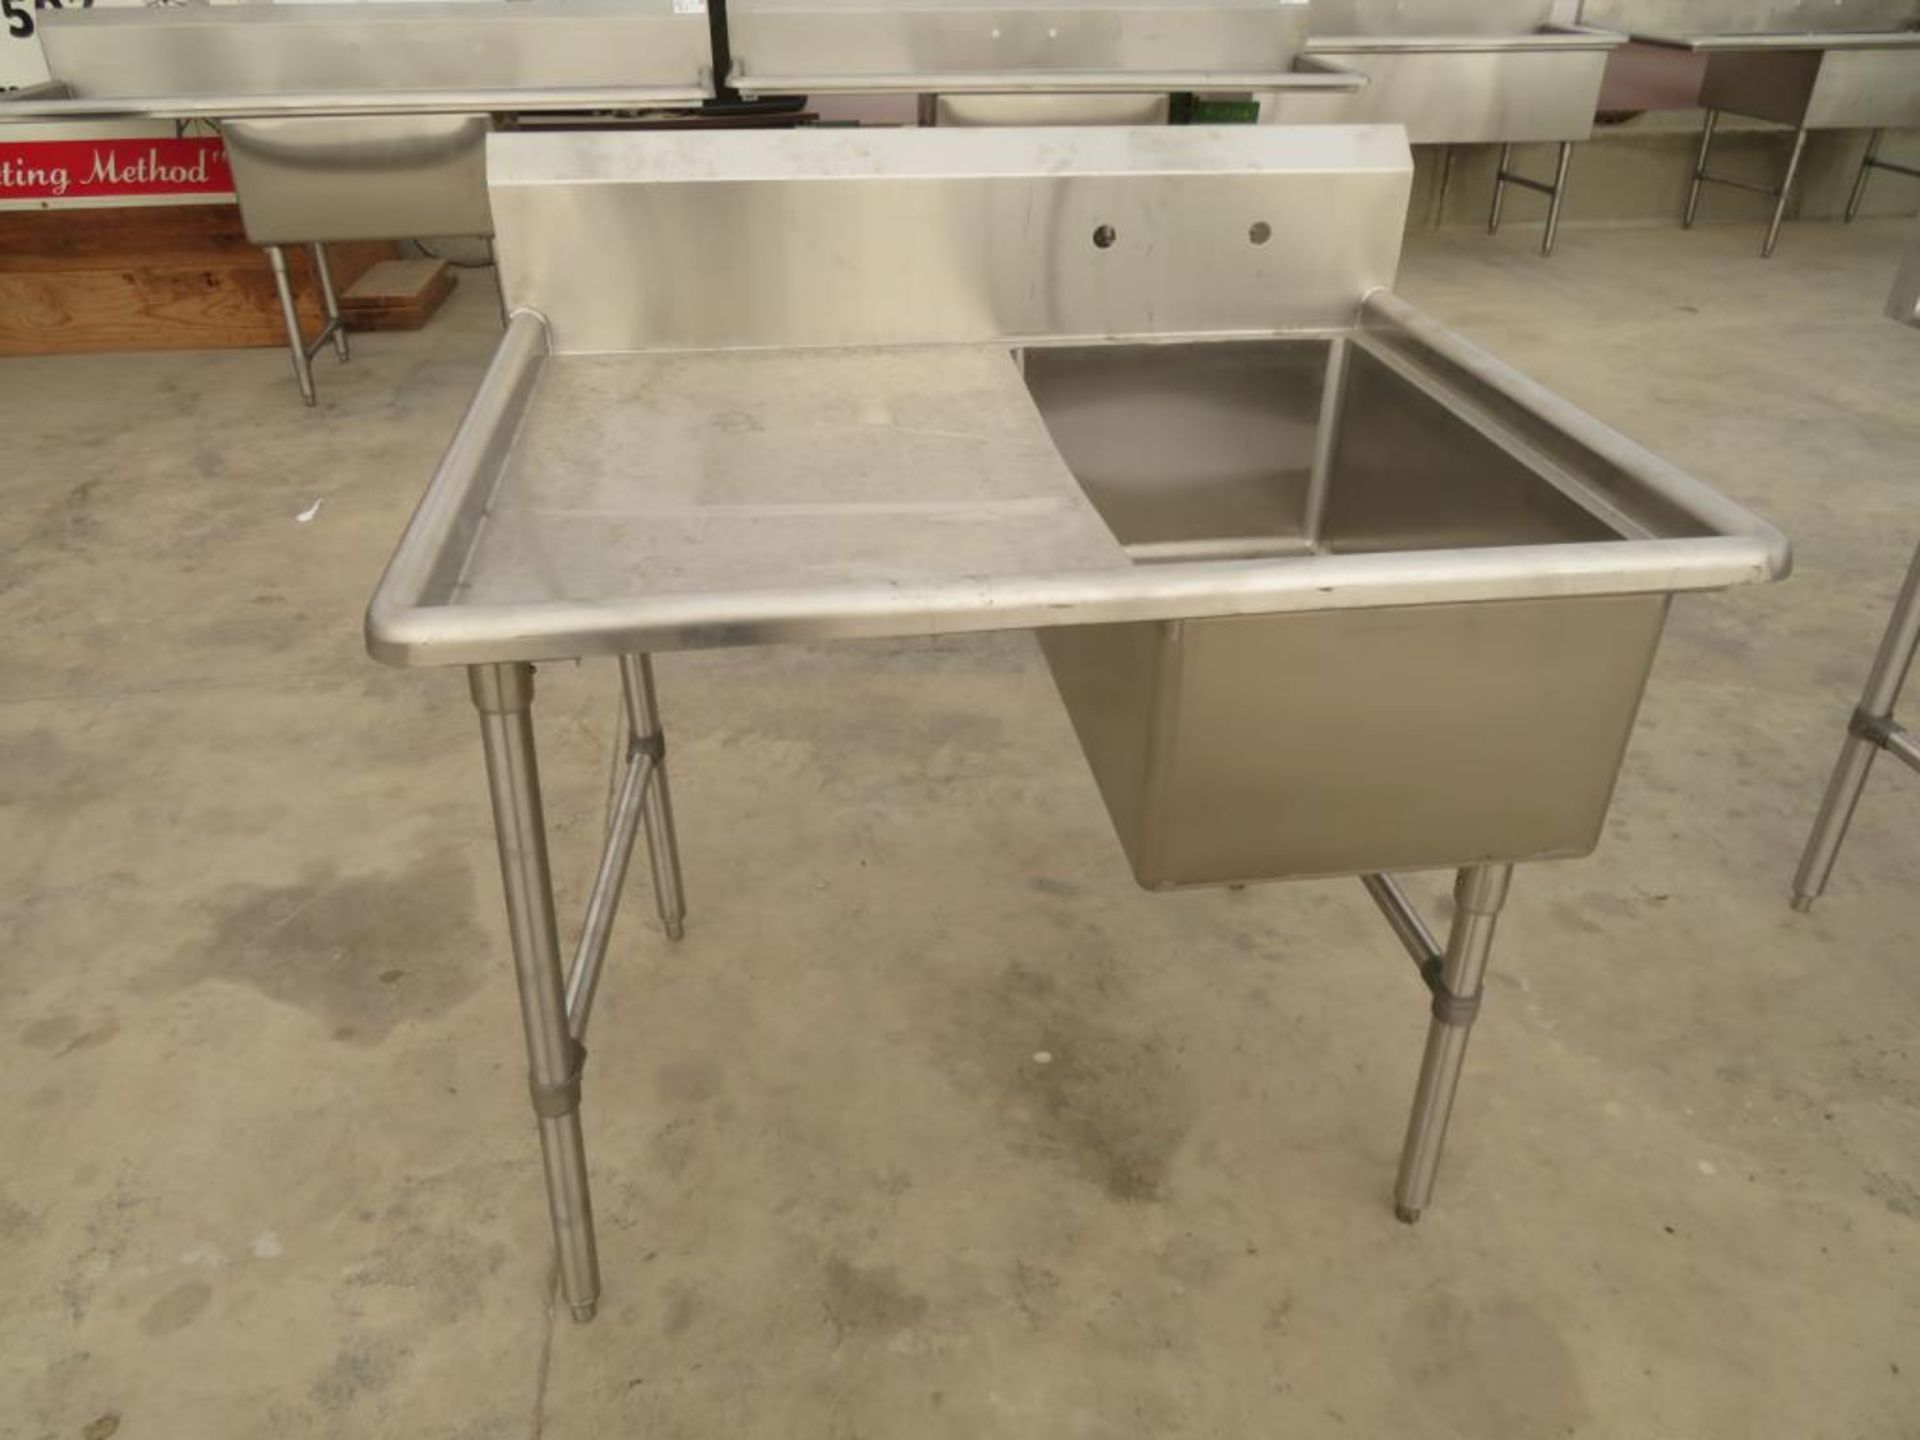 1 compartment sink, 1-18"x30" bowl with lever waste bracket with 24" drainboard left